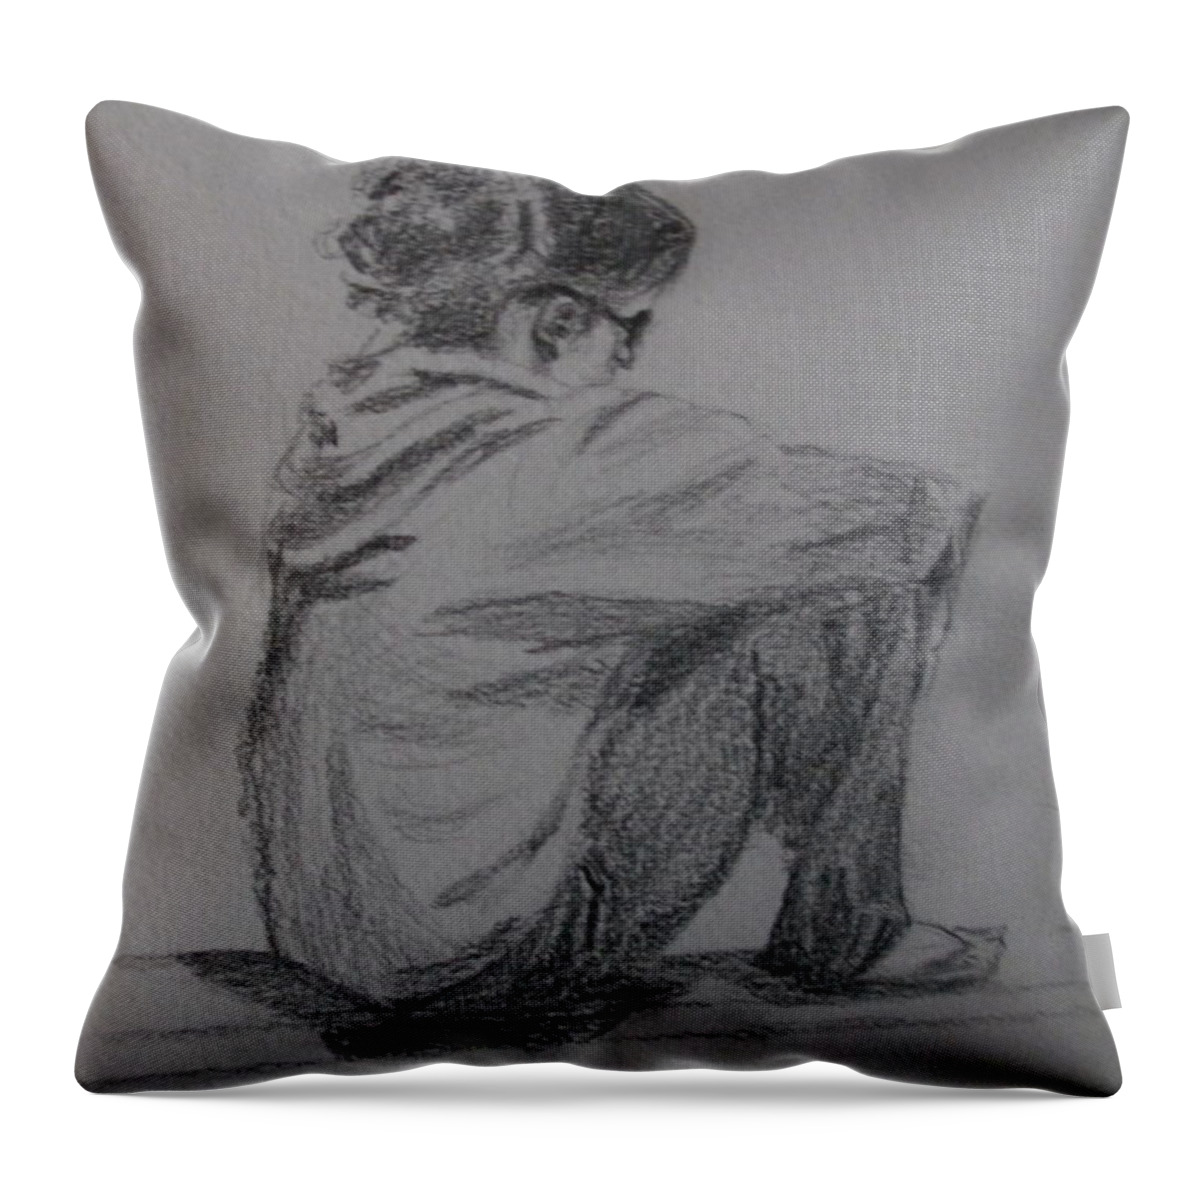 Sketch Throw Pillow featuring the painting Sitting Girl by Katherine Berlin